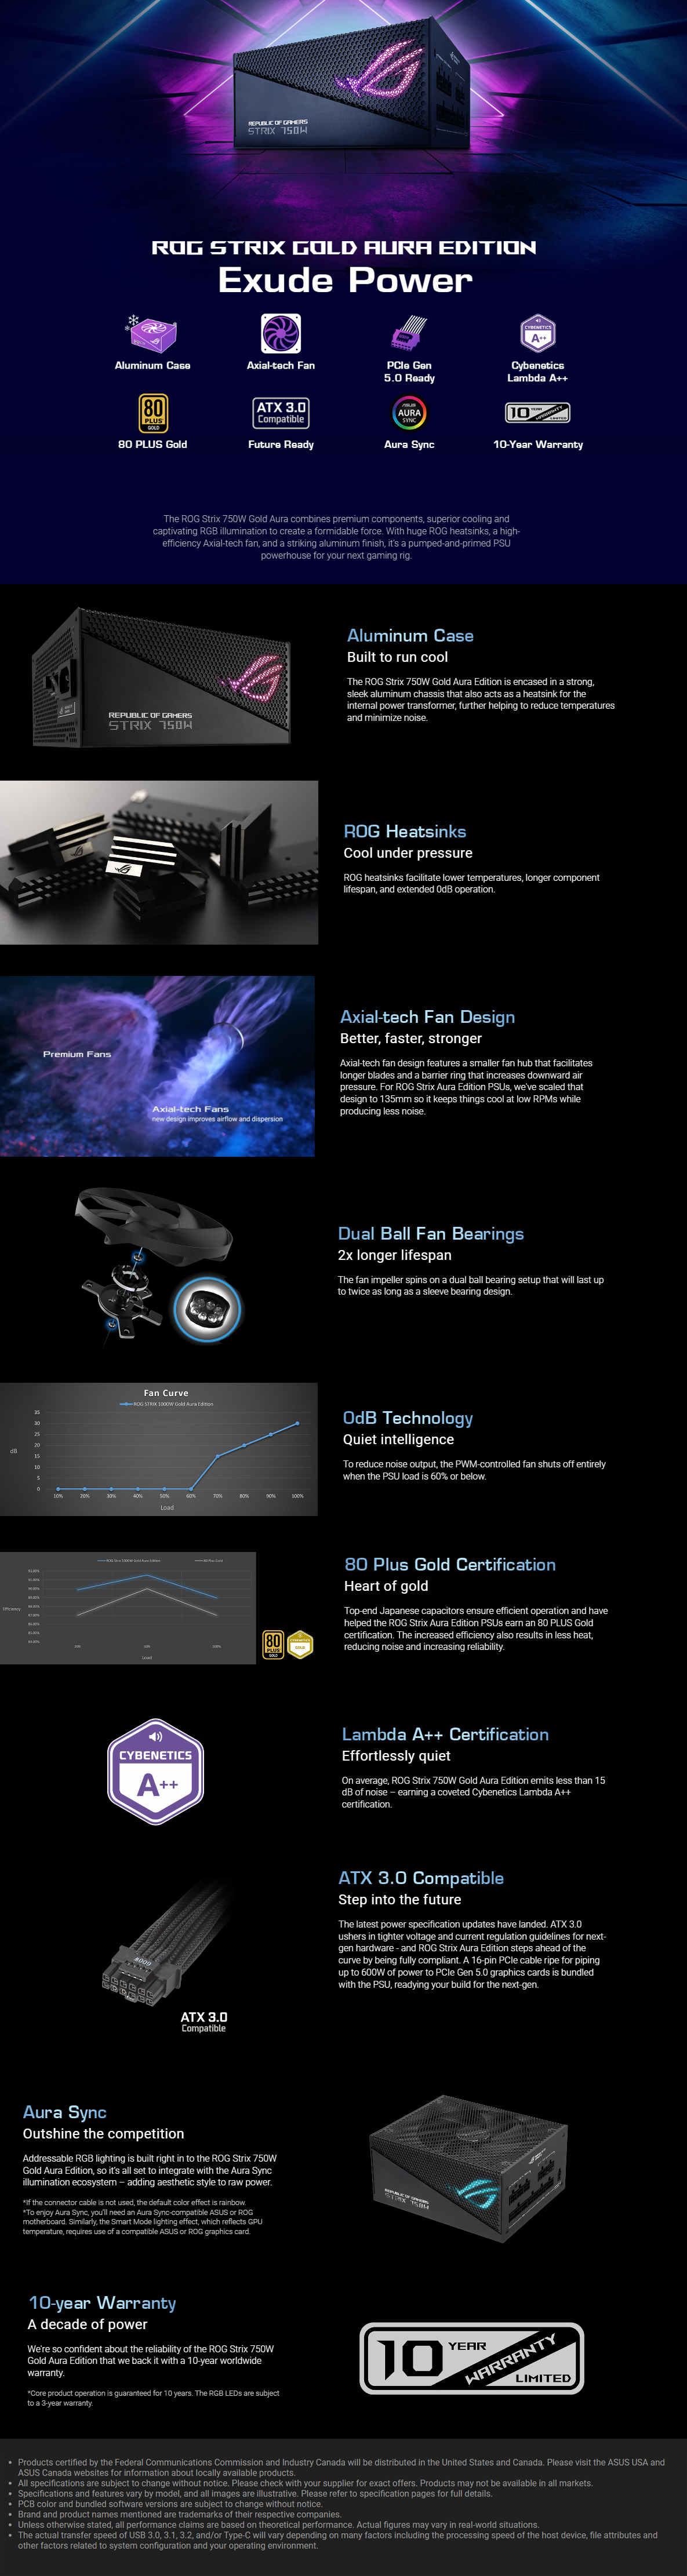 A large marketing image providing additional information about the product ASUS ROG Strix Aura Edition 750W Gold PCIe 5.0 ATX Modular PSU - Additional alt info not provided